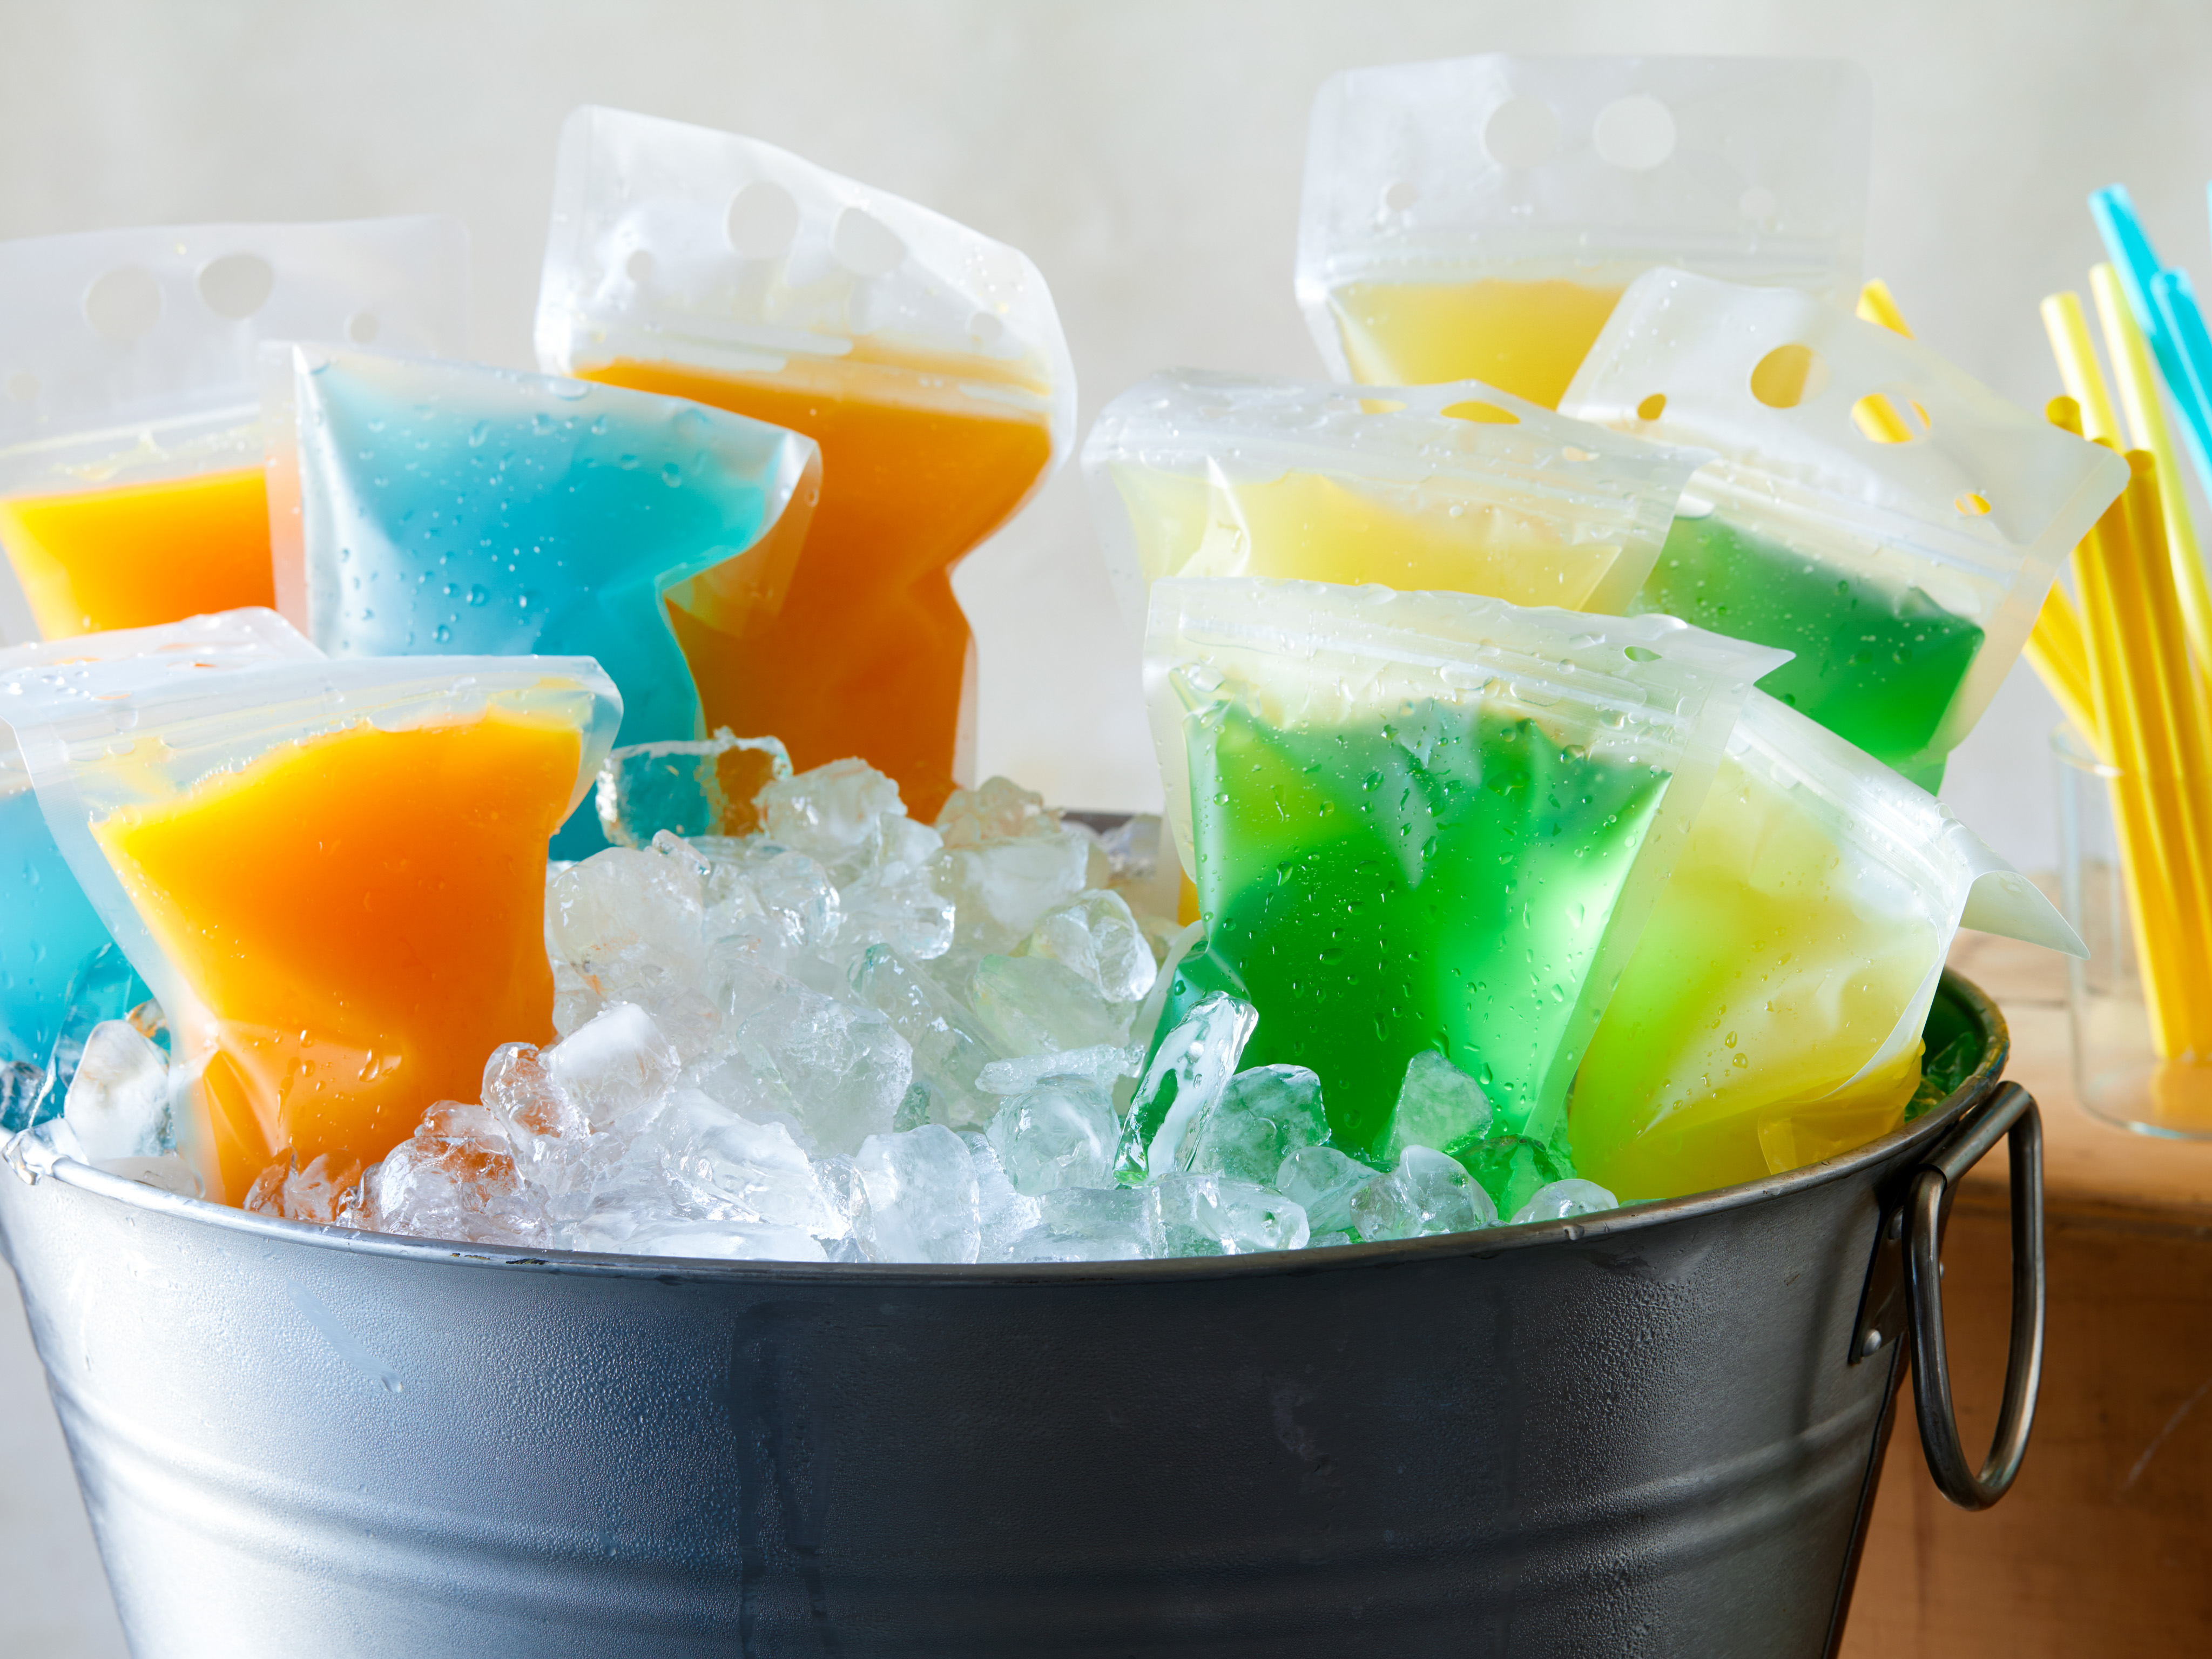 https://www.foodnetwork.com/content/dam/images/food/fullset/2018/7/23/0/FNK_Game-Day-Color-Drink-Pouches-H1_s4x3.jpg